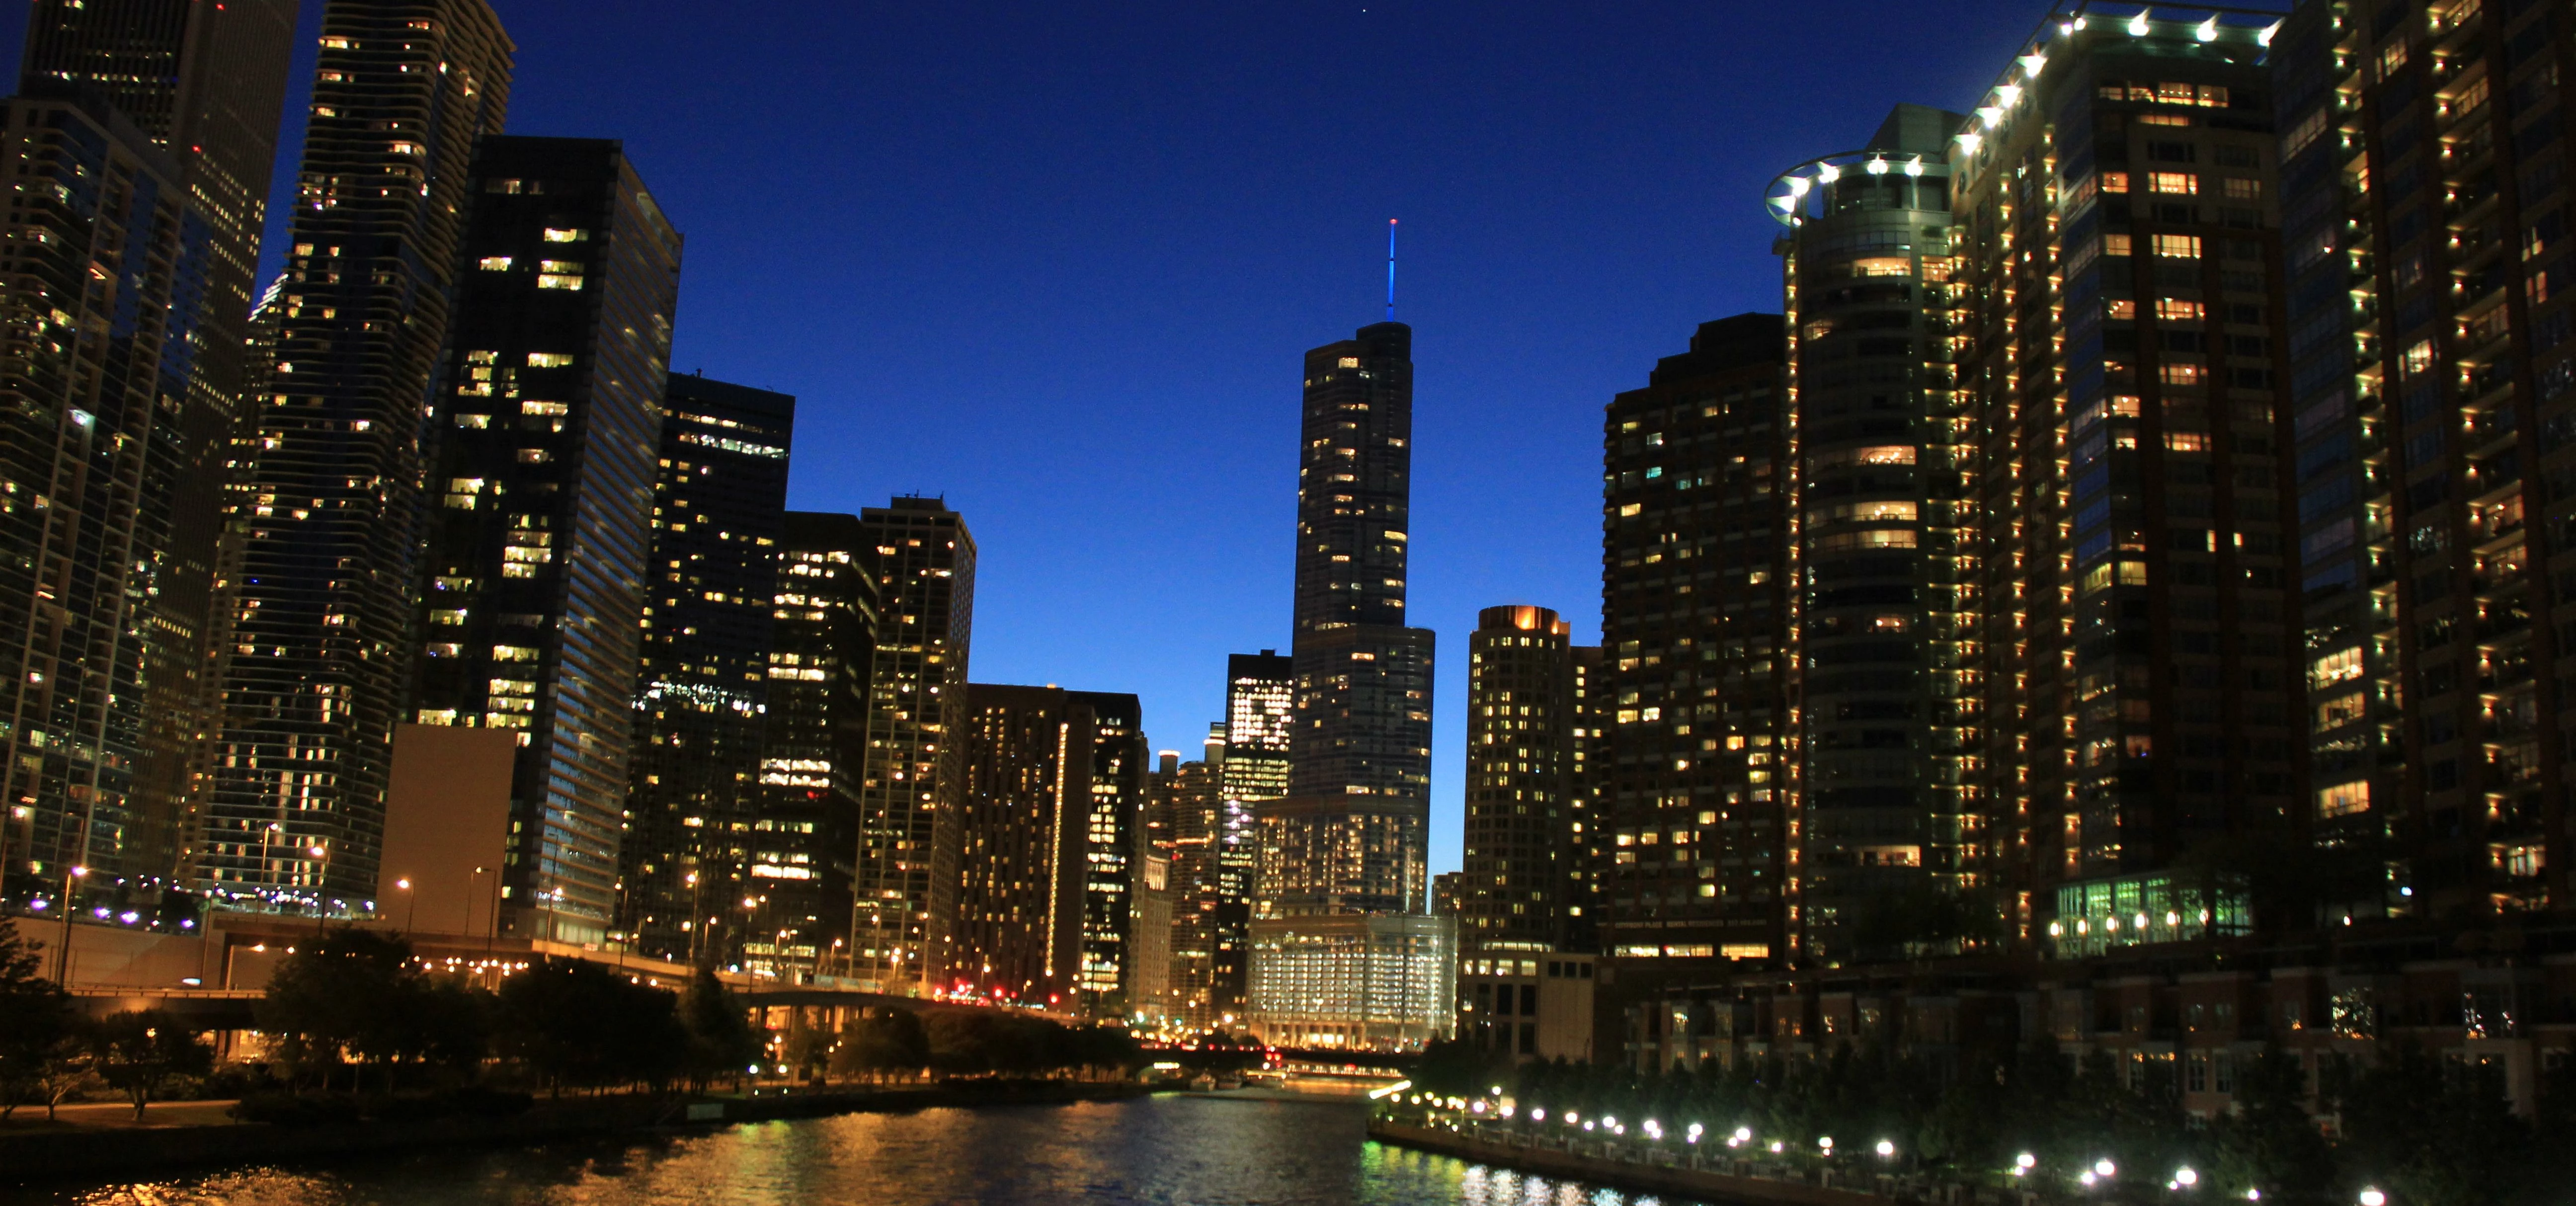 My favourite view of Chicago